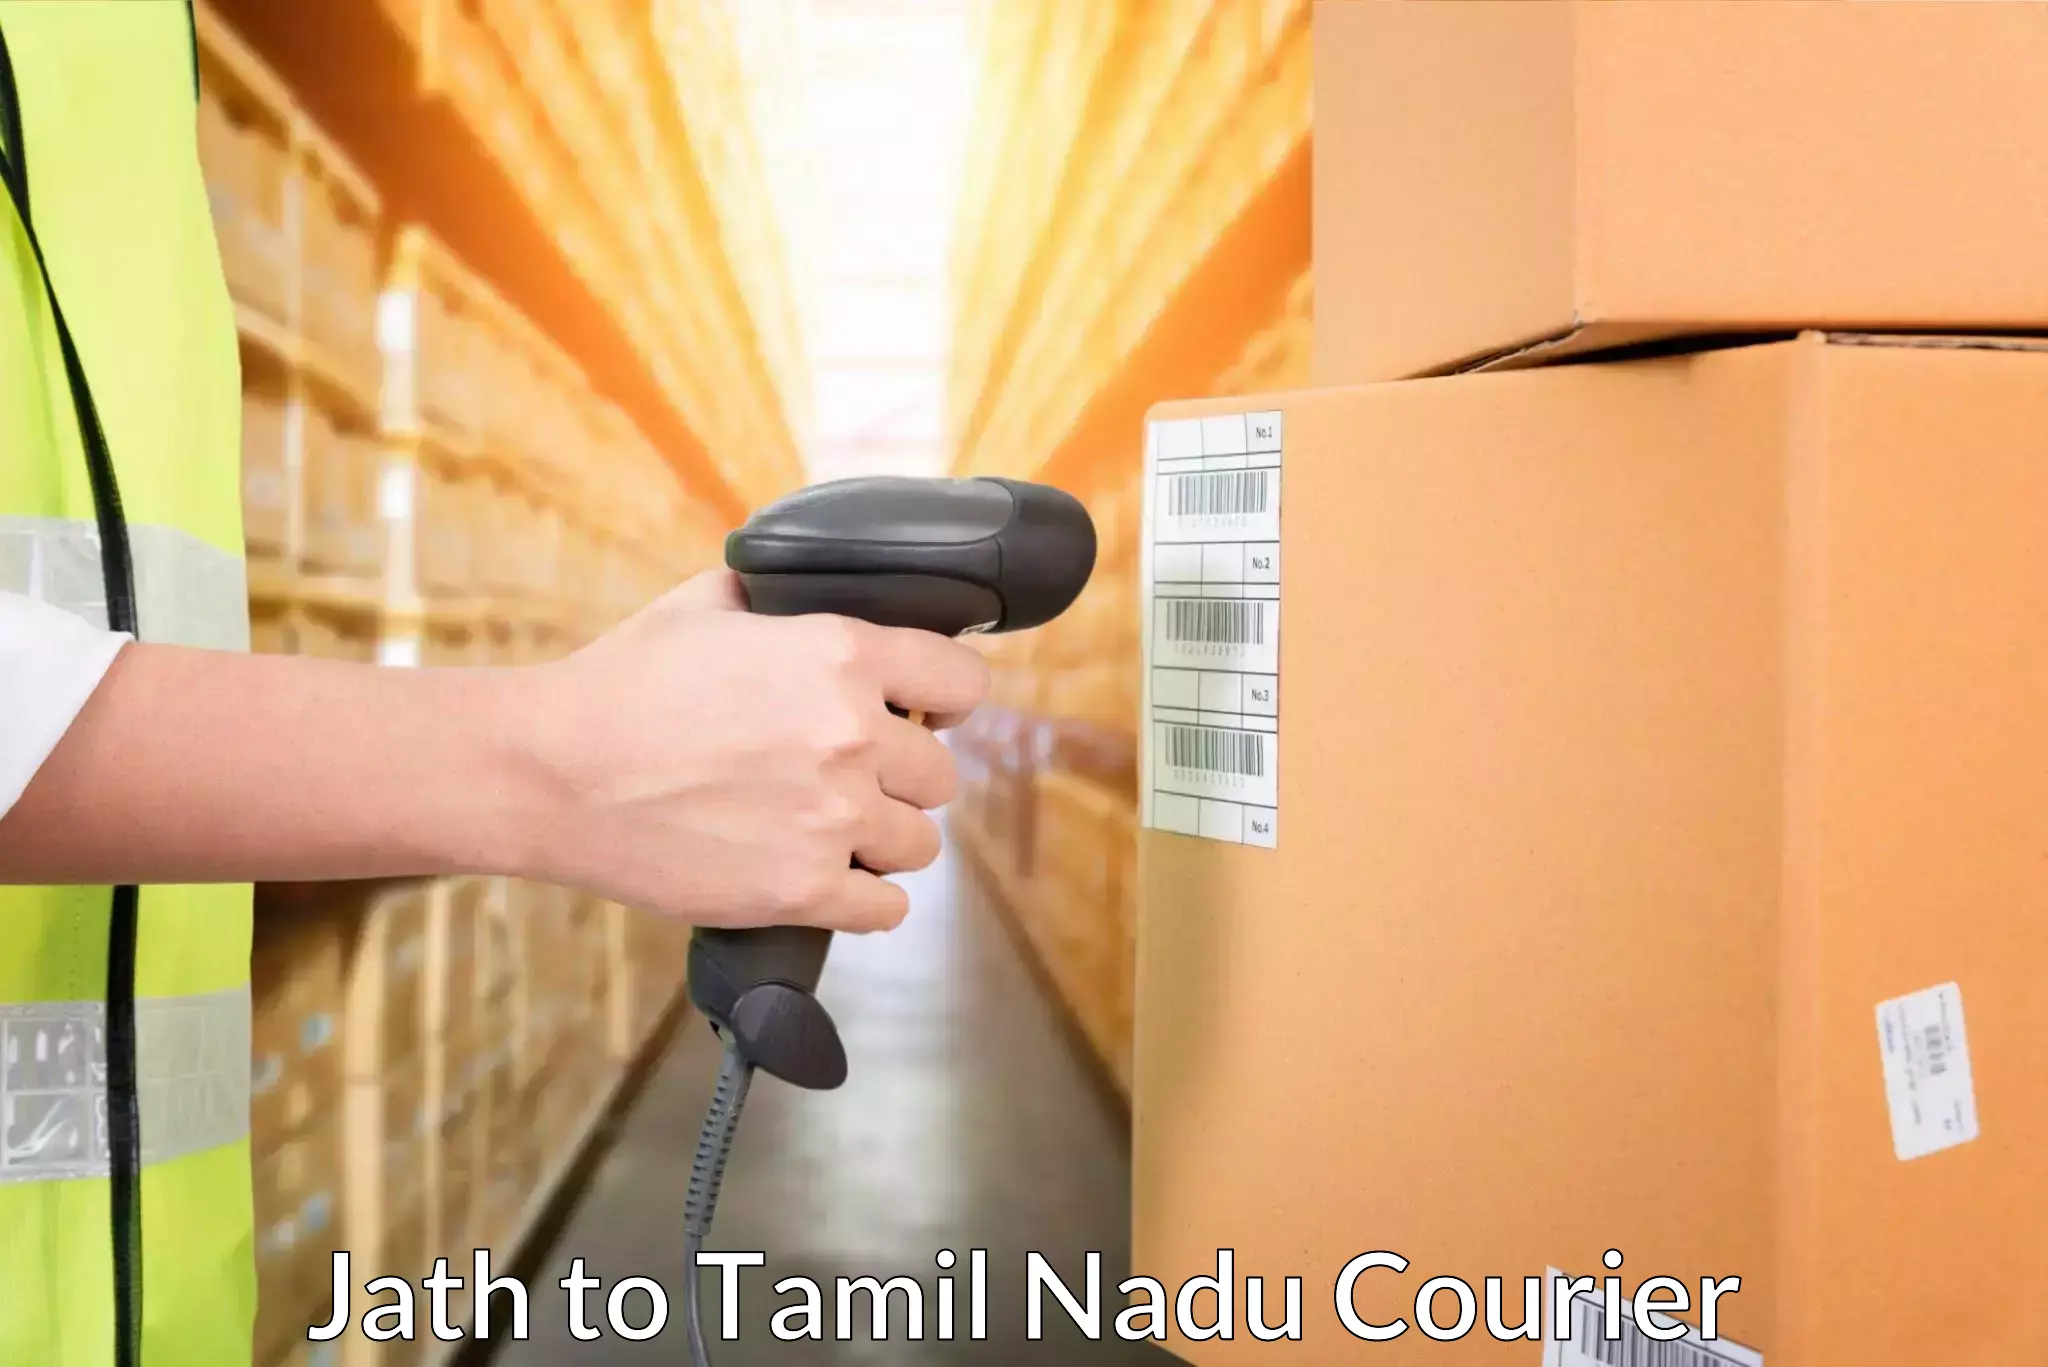 Next-day delivery options Jath to Tamil Nadu